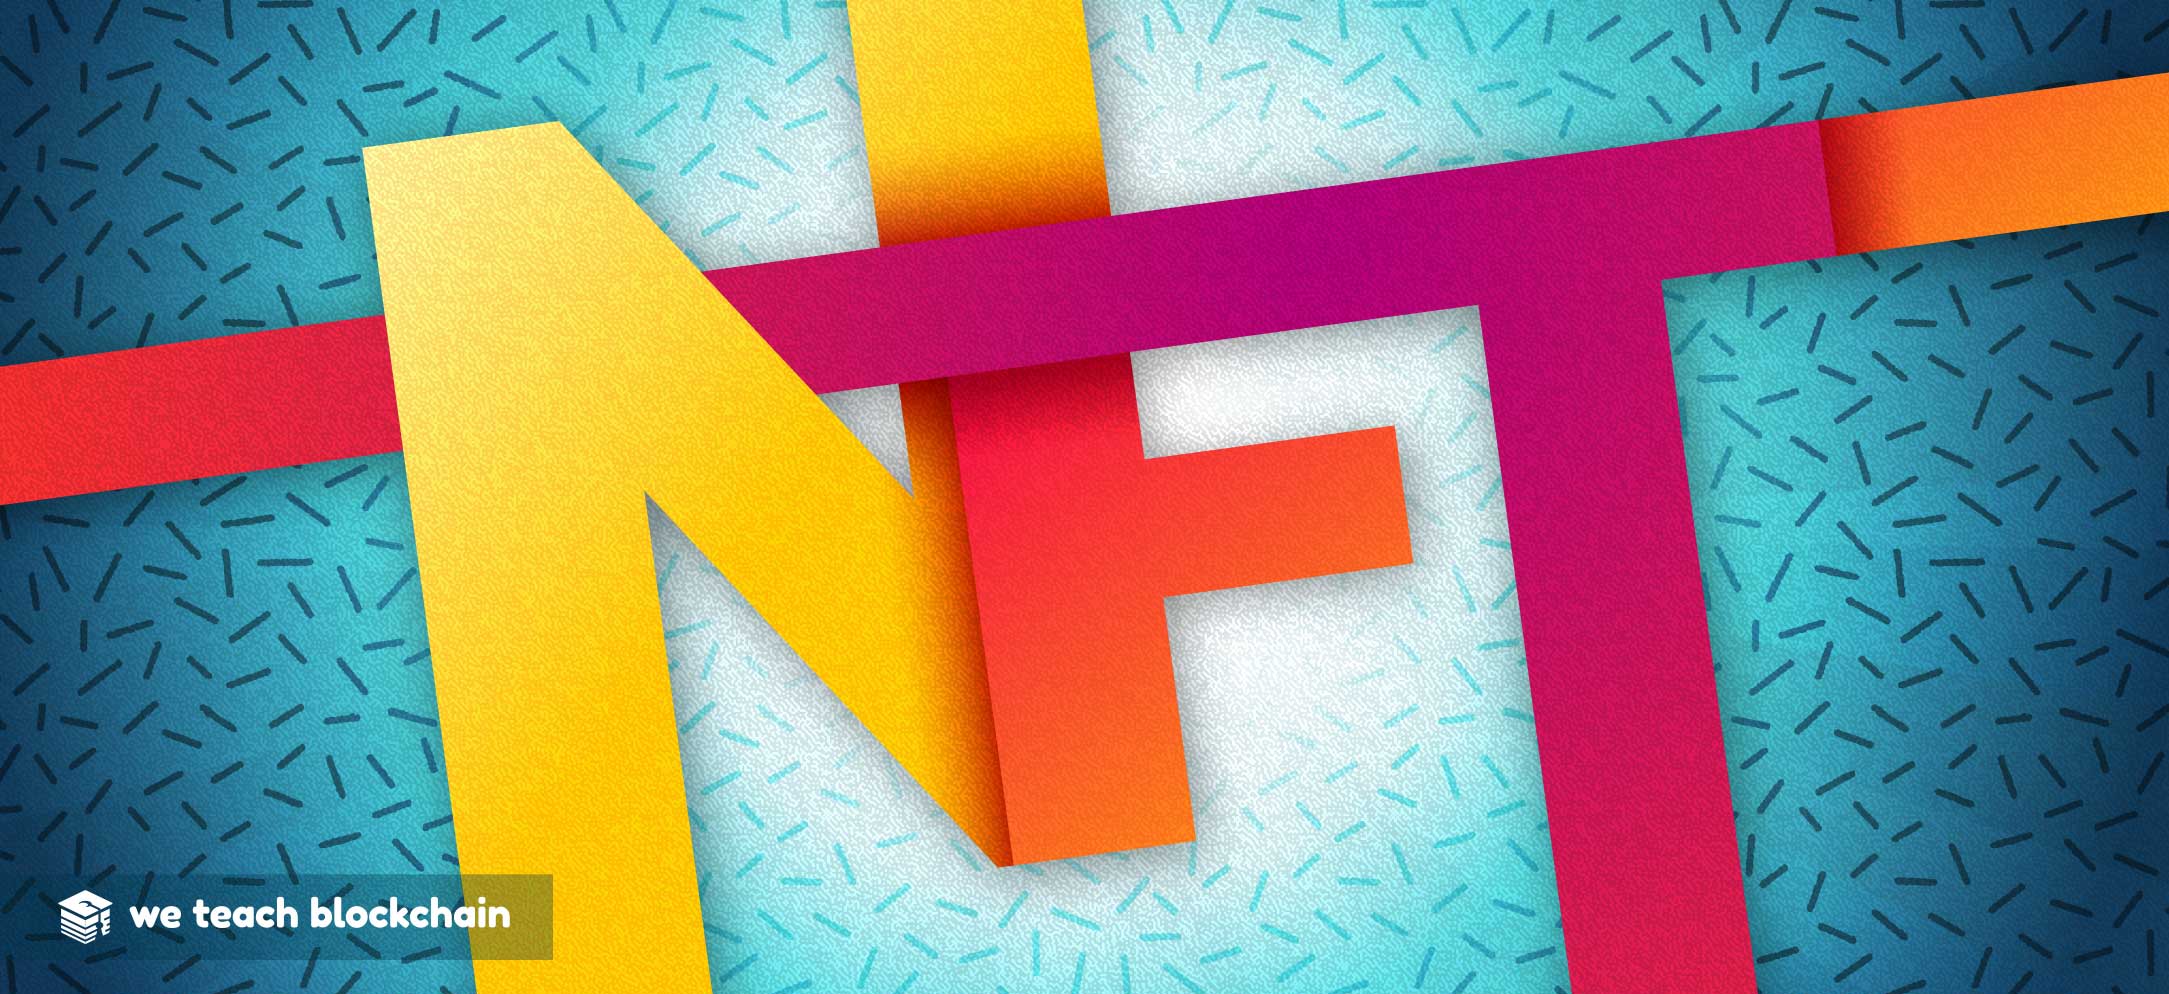 Letters N, sF, and T merged together